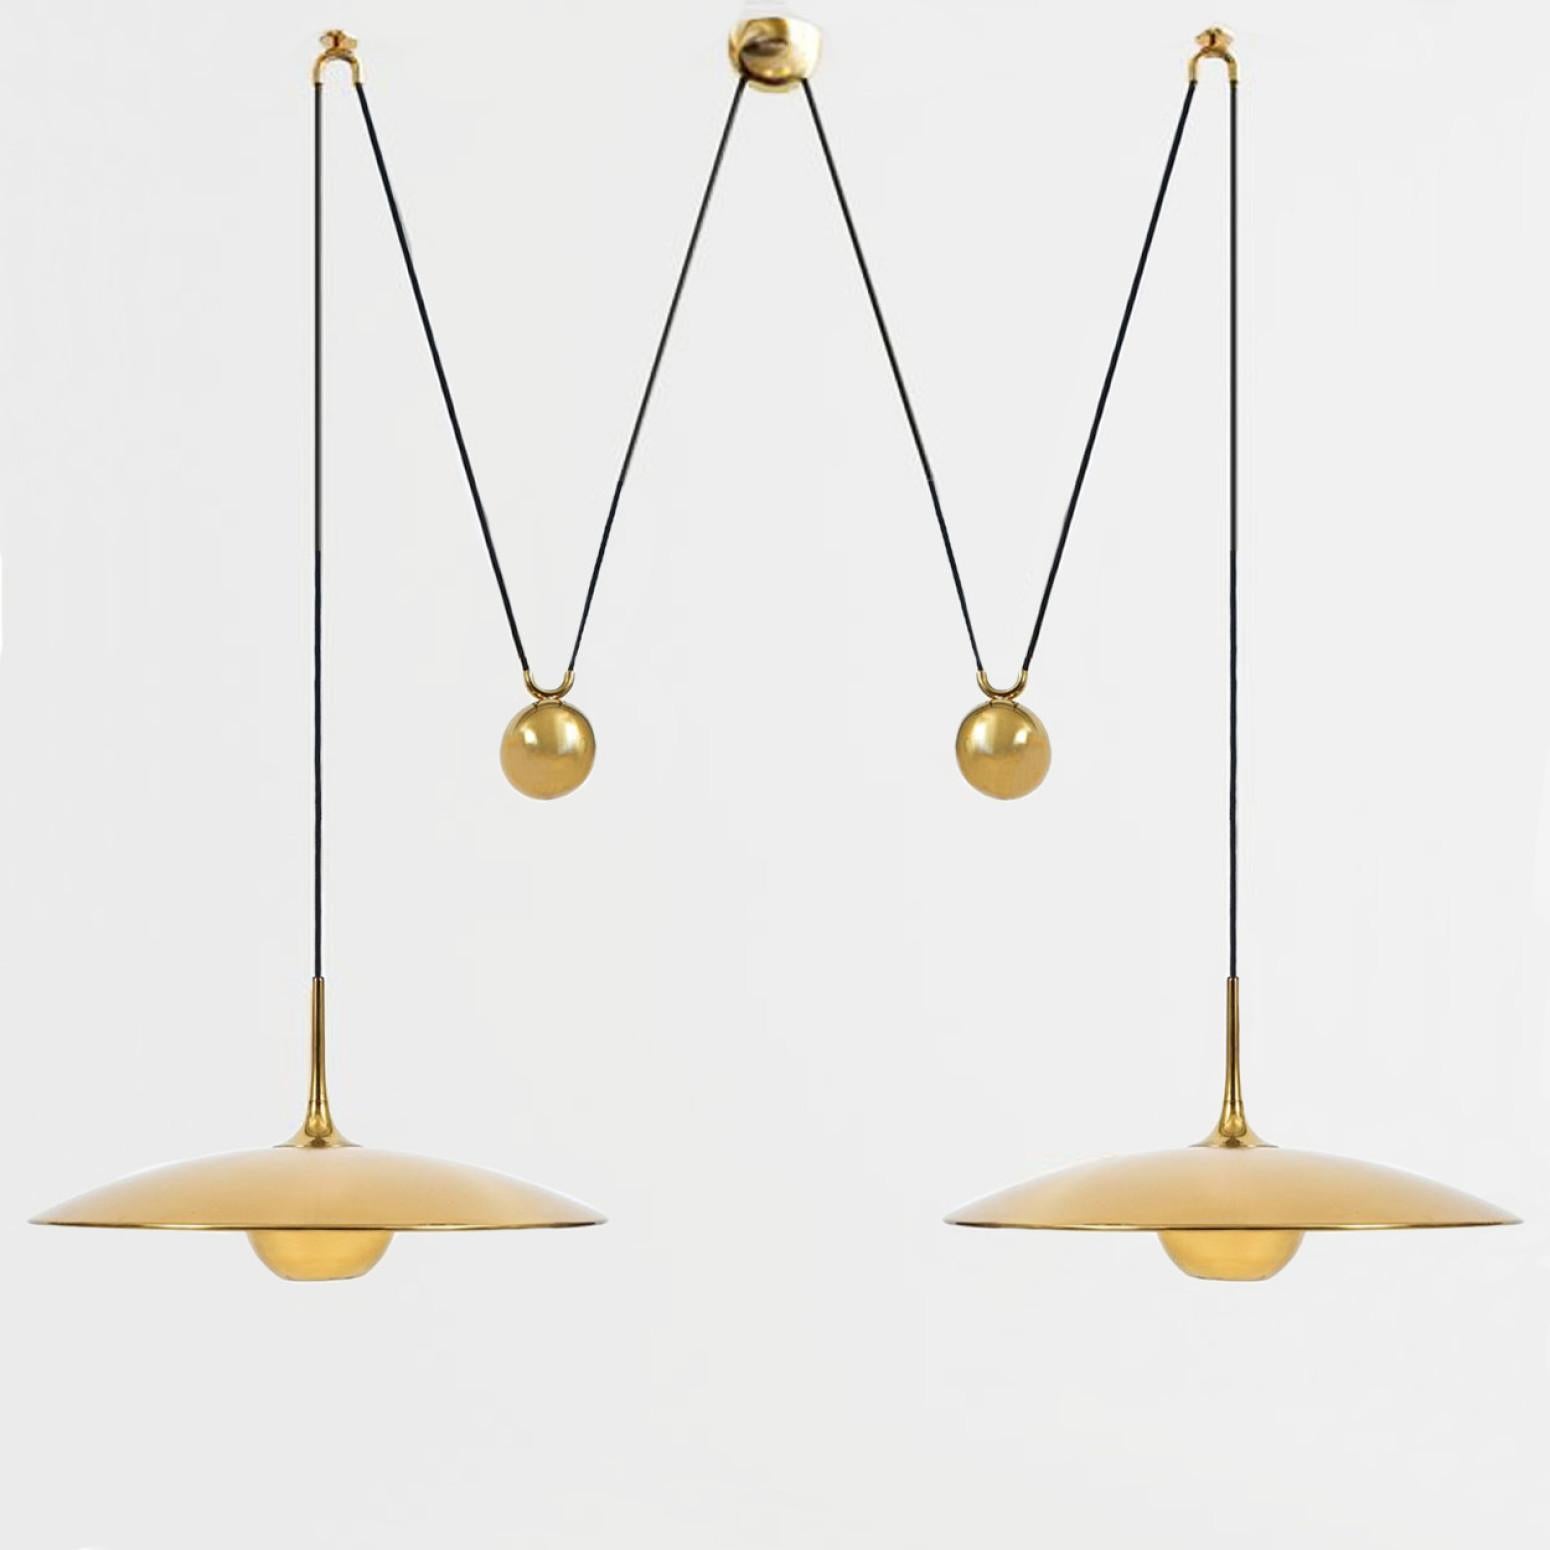 Fantastic Onos-55 Double Pull pendant light by Florian Schulz, Germany, Europe. Design period: 1970-1979, production period: 2022.

Two brass polished unlacquered pendants suspended with their own brass ball counter balance. One canopy supports